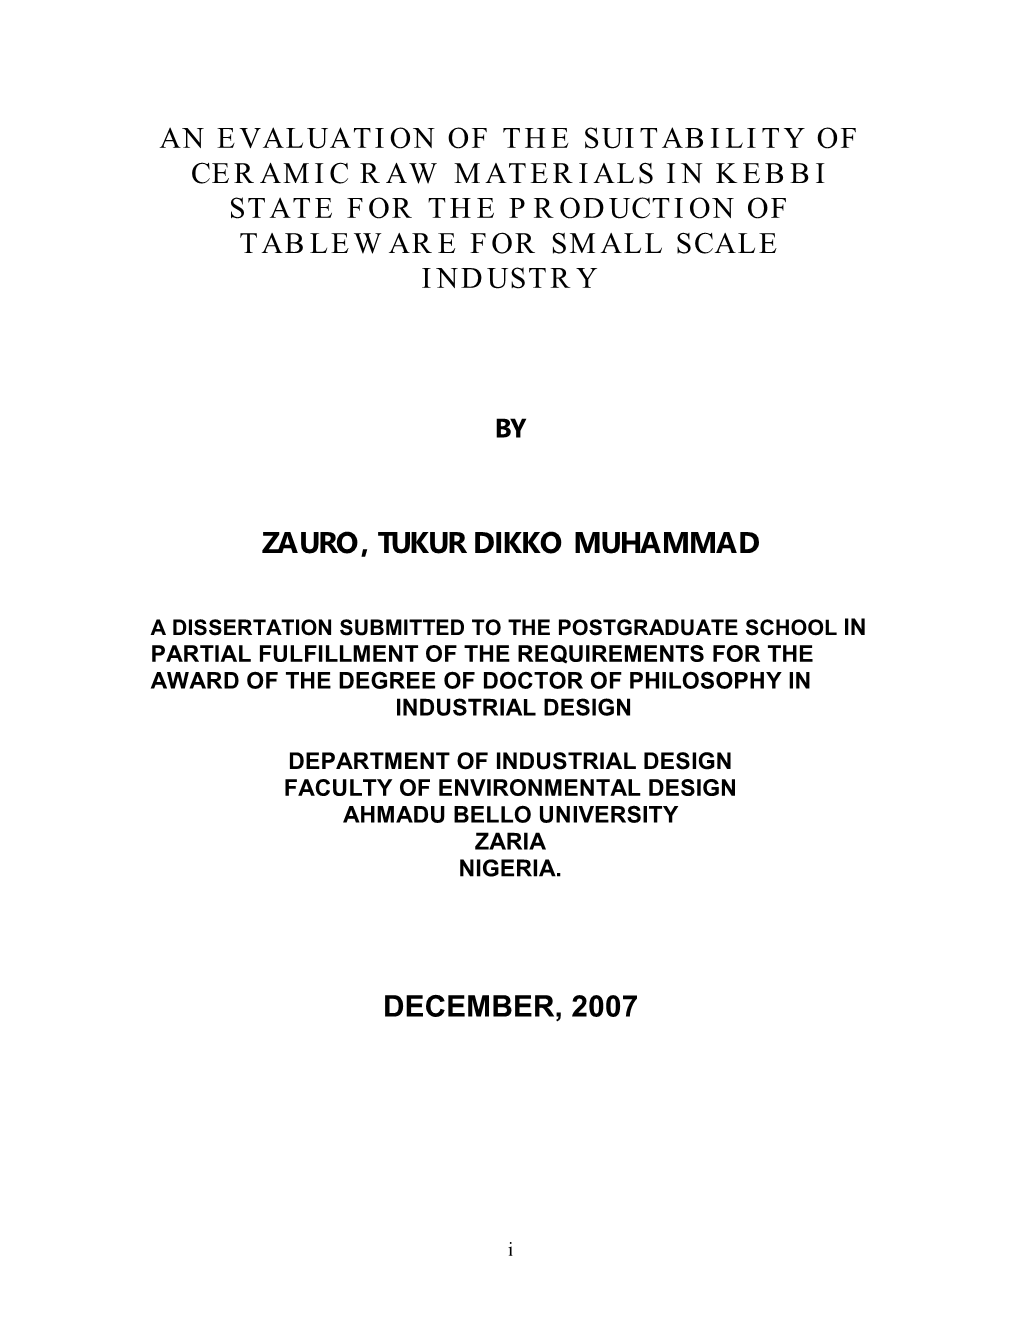 An Evaluation of the Suitability of Ceramic Raw Materials in Kebbi State for the Production of Tableware for Small Scale Industry